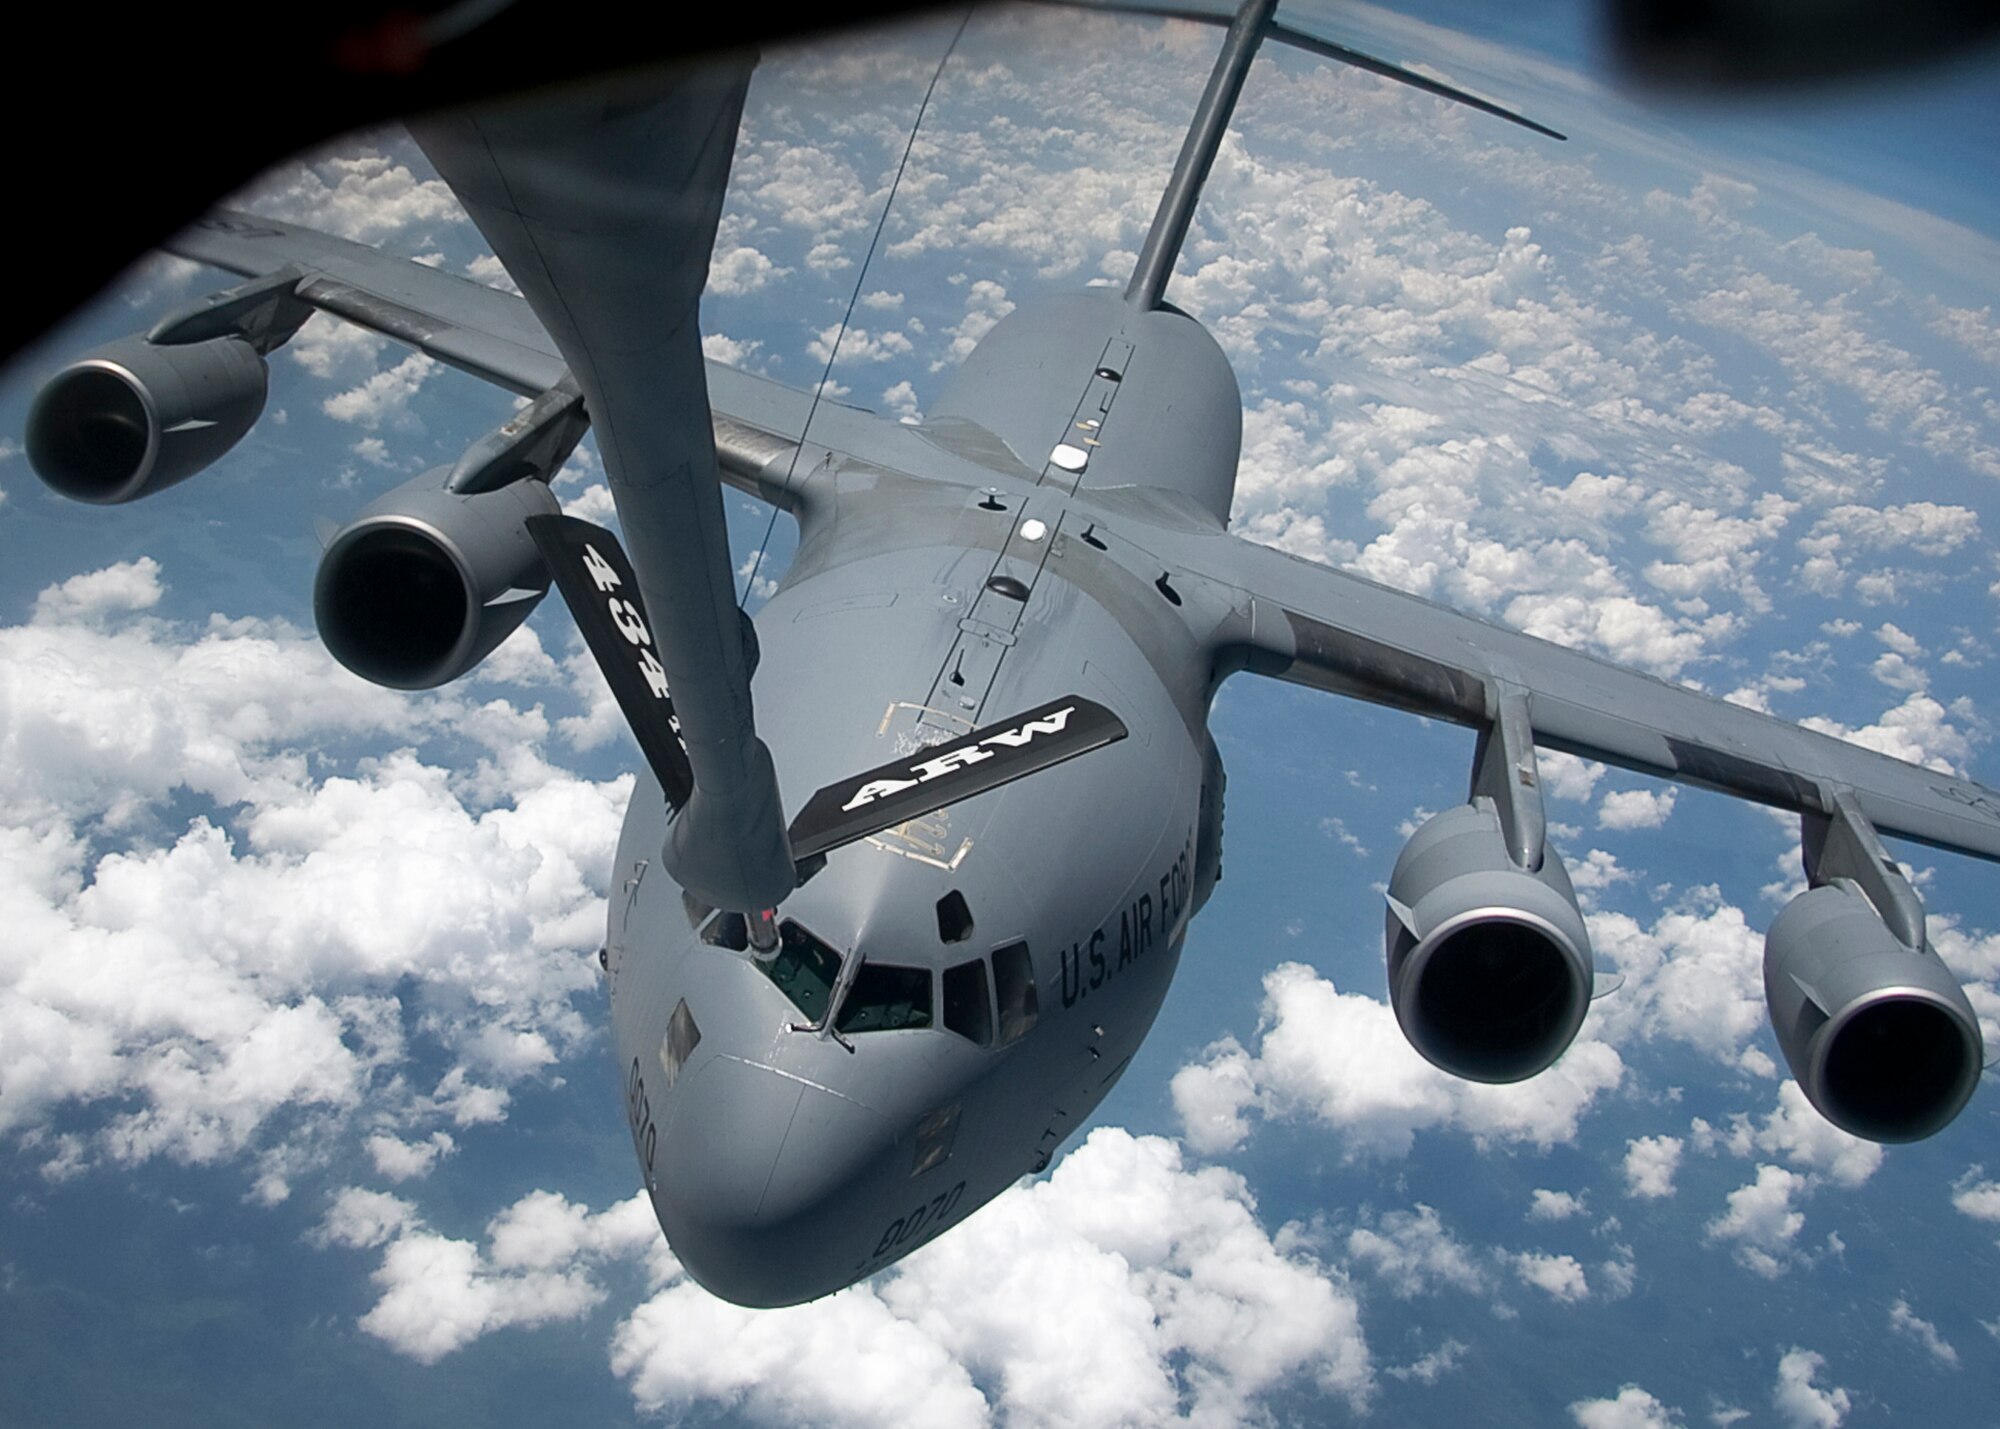 GRISSOM AIR RESERVE BASE, Ind. -- A C-17 Globemaster III from the 437th Airlift Wing flies behind a KC-135R Stratotanker from the 434th Air Refueling Wing during an aerial refueling mission Aug. 4. The 437th AW is based out of Joint Base Charleston, S.C. The C-17 Globemaster III is the newest, most flexible cargo aircraft to enter the airlift force. The KC-135 Stratotanker provides the core aerial refueling capability for the United States Air Force and has excelled in this role for more than 50 years. The C-17 is capable of rapid strategic delivery of troops and all types of cargo to main operating bases or directly to forward bases in the deployment area. (U.S. Air Force photo/Tech. Sgt. Mark R. W. Orders-Woempner) 